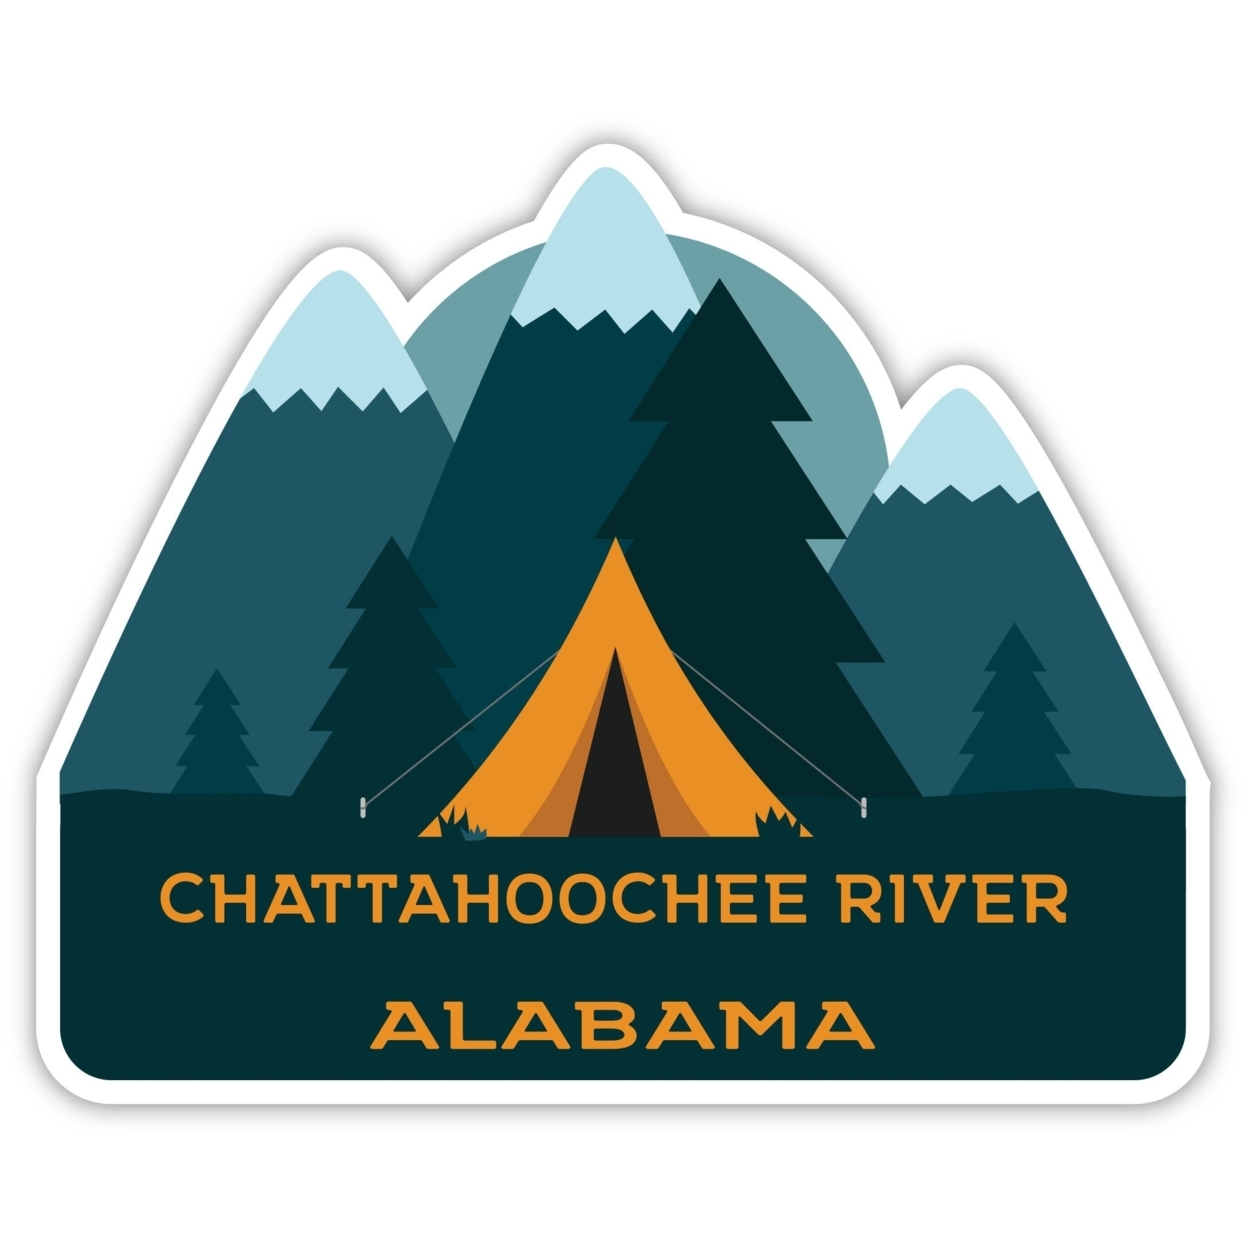 Chattahoochee River Alabama Souvenir Decorative Stickers (Choose Theme And Size) - 4-Pack, 2-Inch, Tent